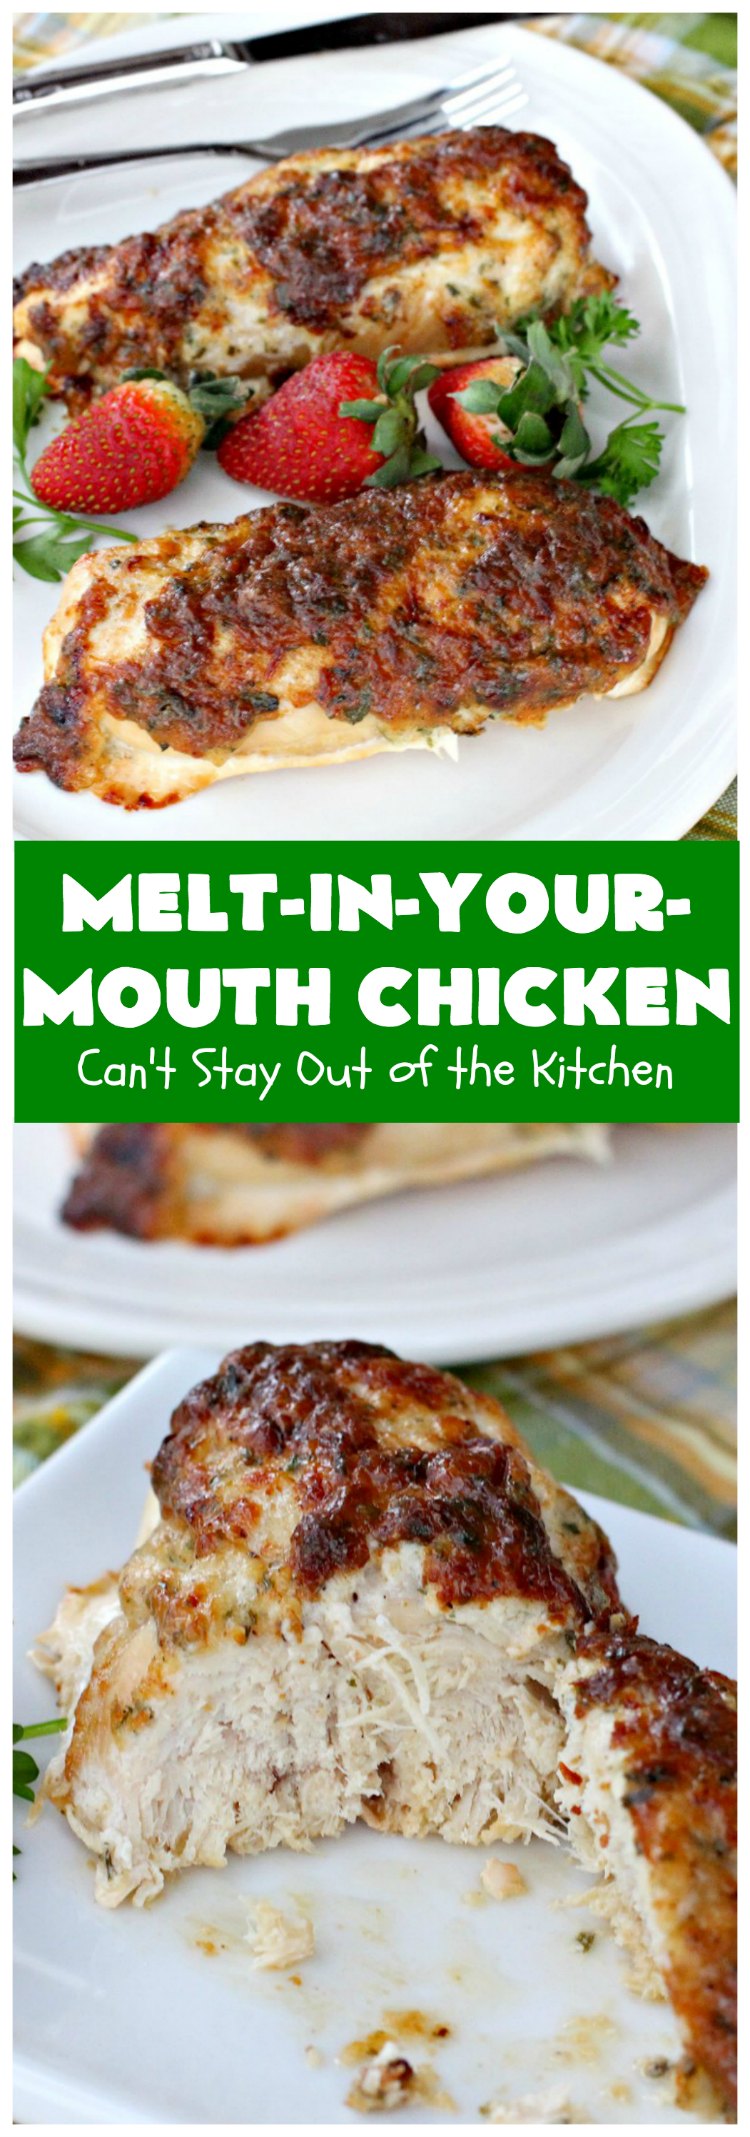 Melt-In-Your-Mouth Chicken | Can't Stay Out of the Kitchen | this easy #chicken entree is so delicious it melts in your mouth! Great for family or company dinners. #GlutenFree #MeltInYourMouthChicken